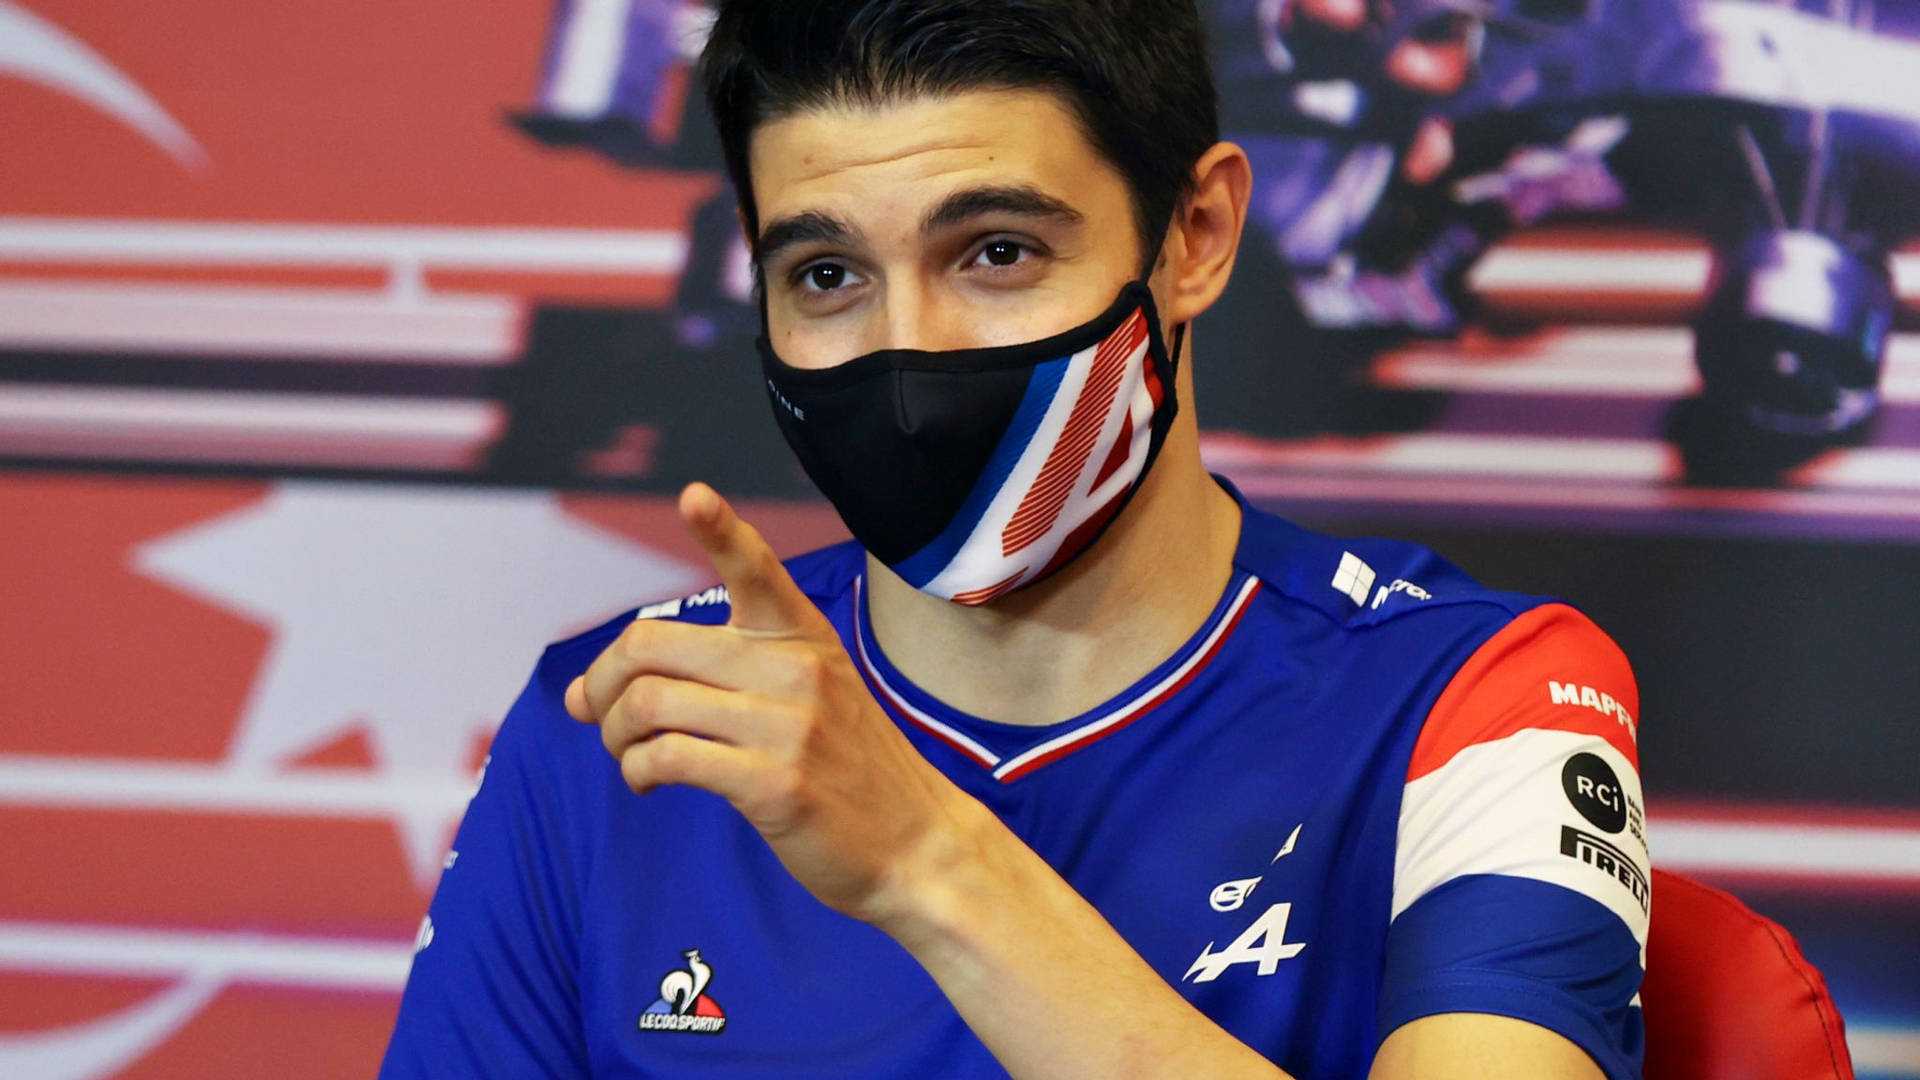 (assuming This Sentence Is Referring To A Wallpaper Featuring Esteban Ocon Wearing A Mask) Wallpaper